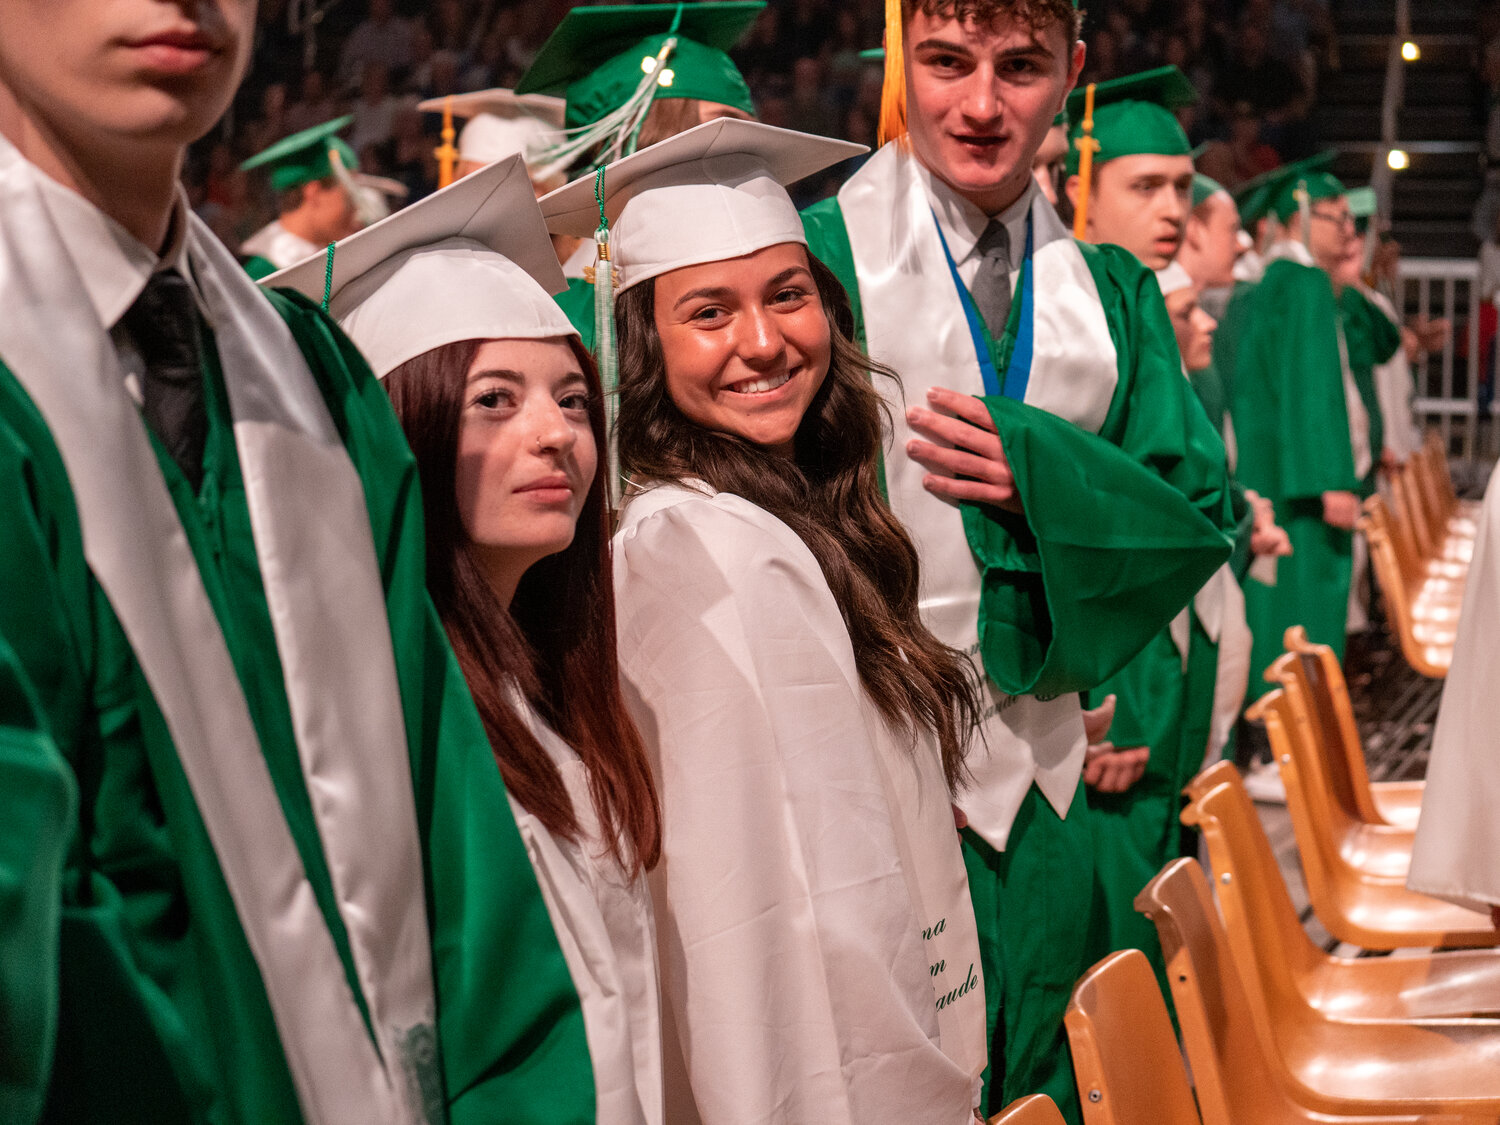 Students take their places on the floor of the Stabler Arena Tuesday for the start of the Pennridge High School graduation ceremony.